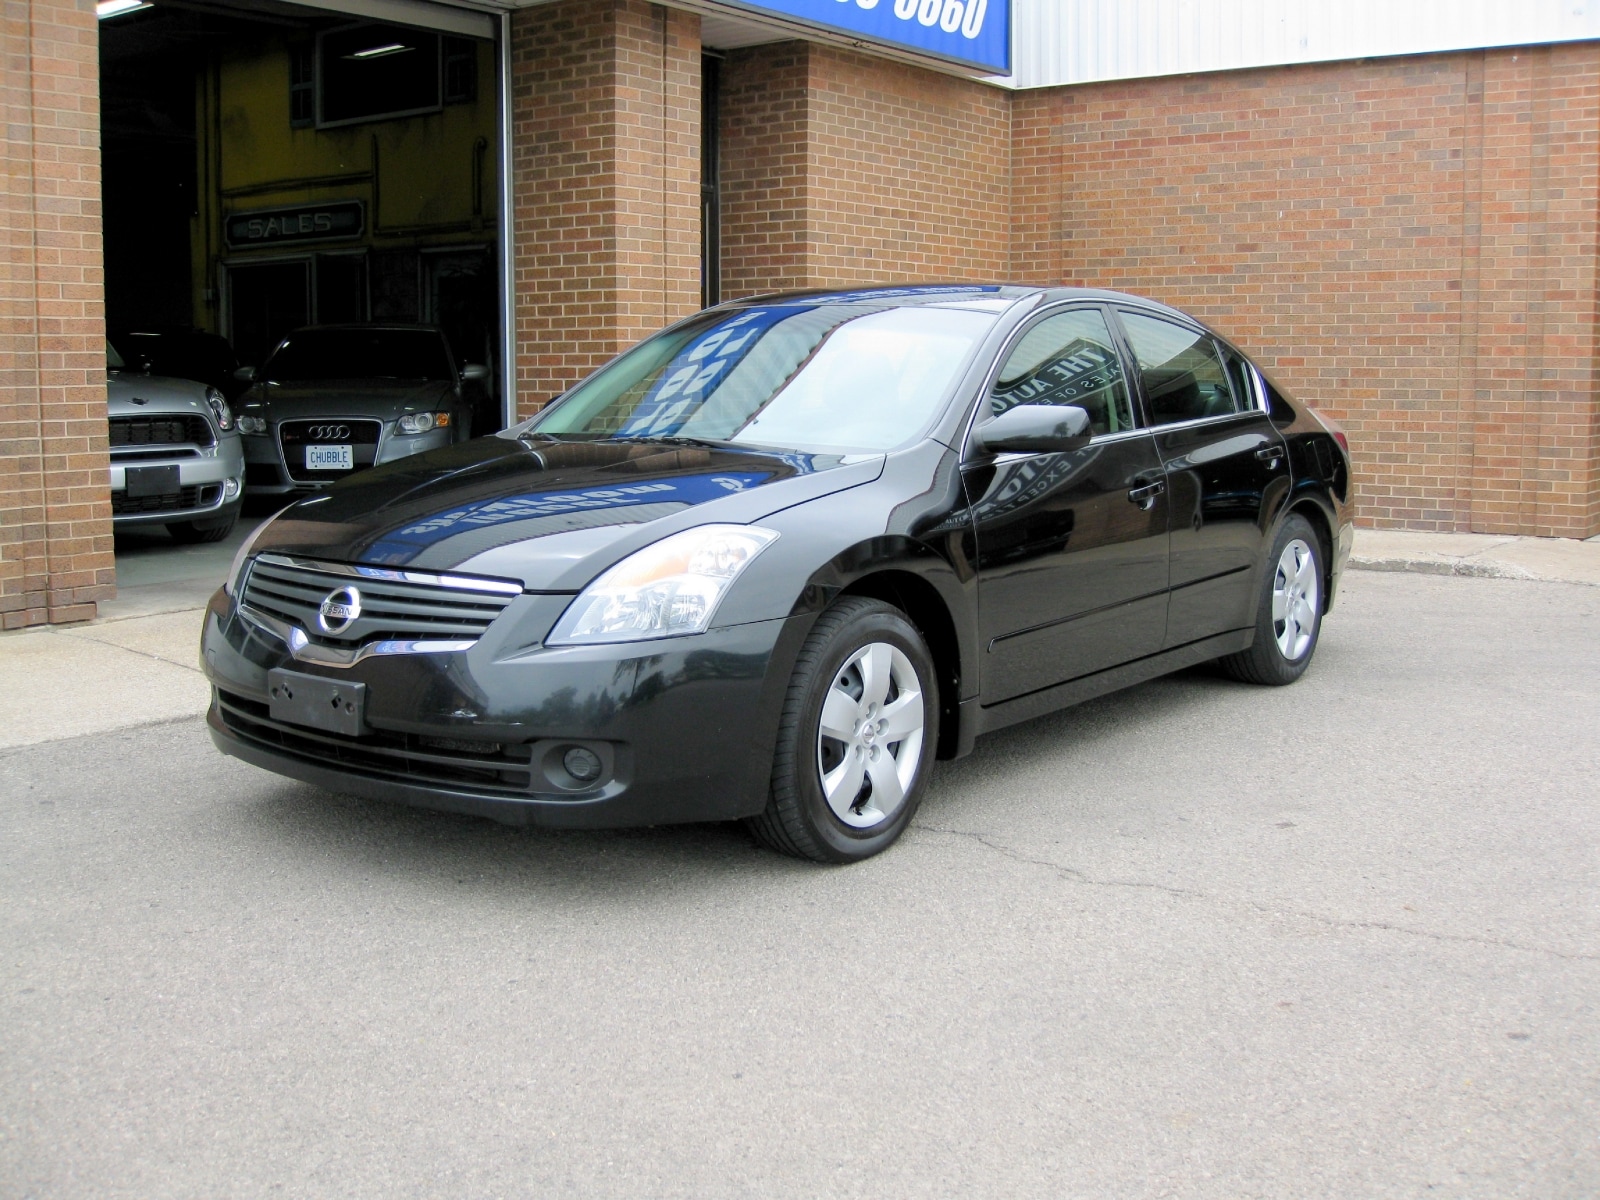 2008 Nissan altima monthly payments #4